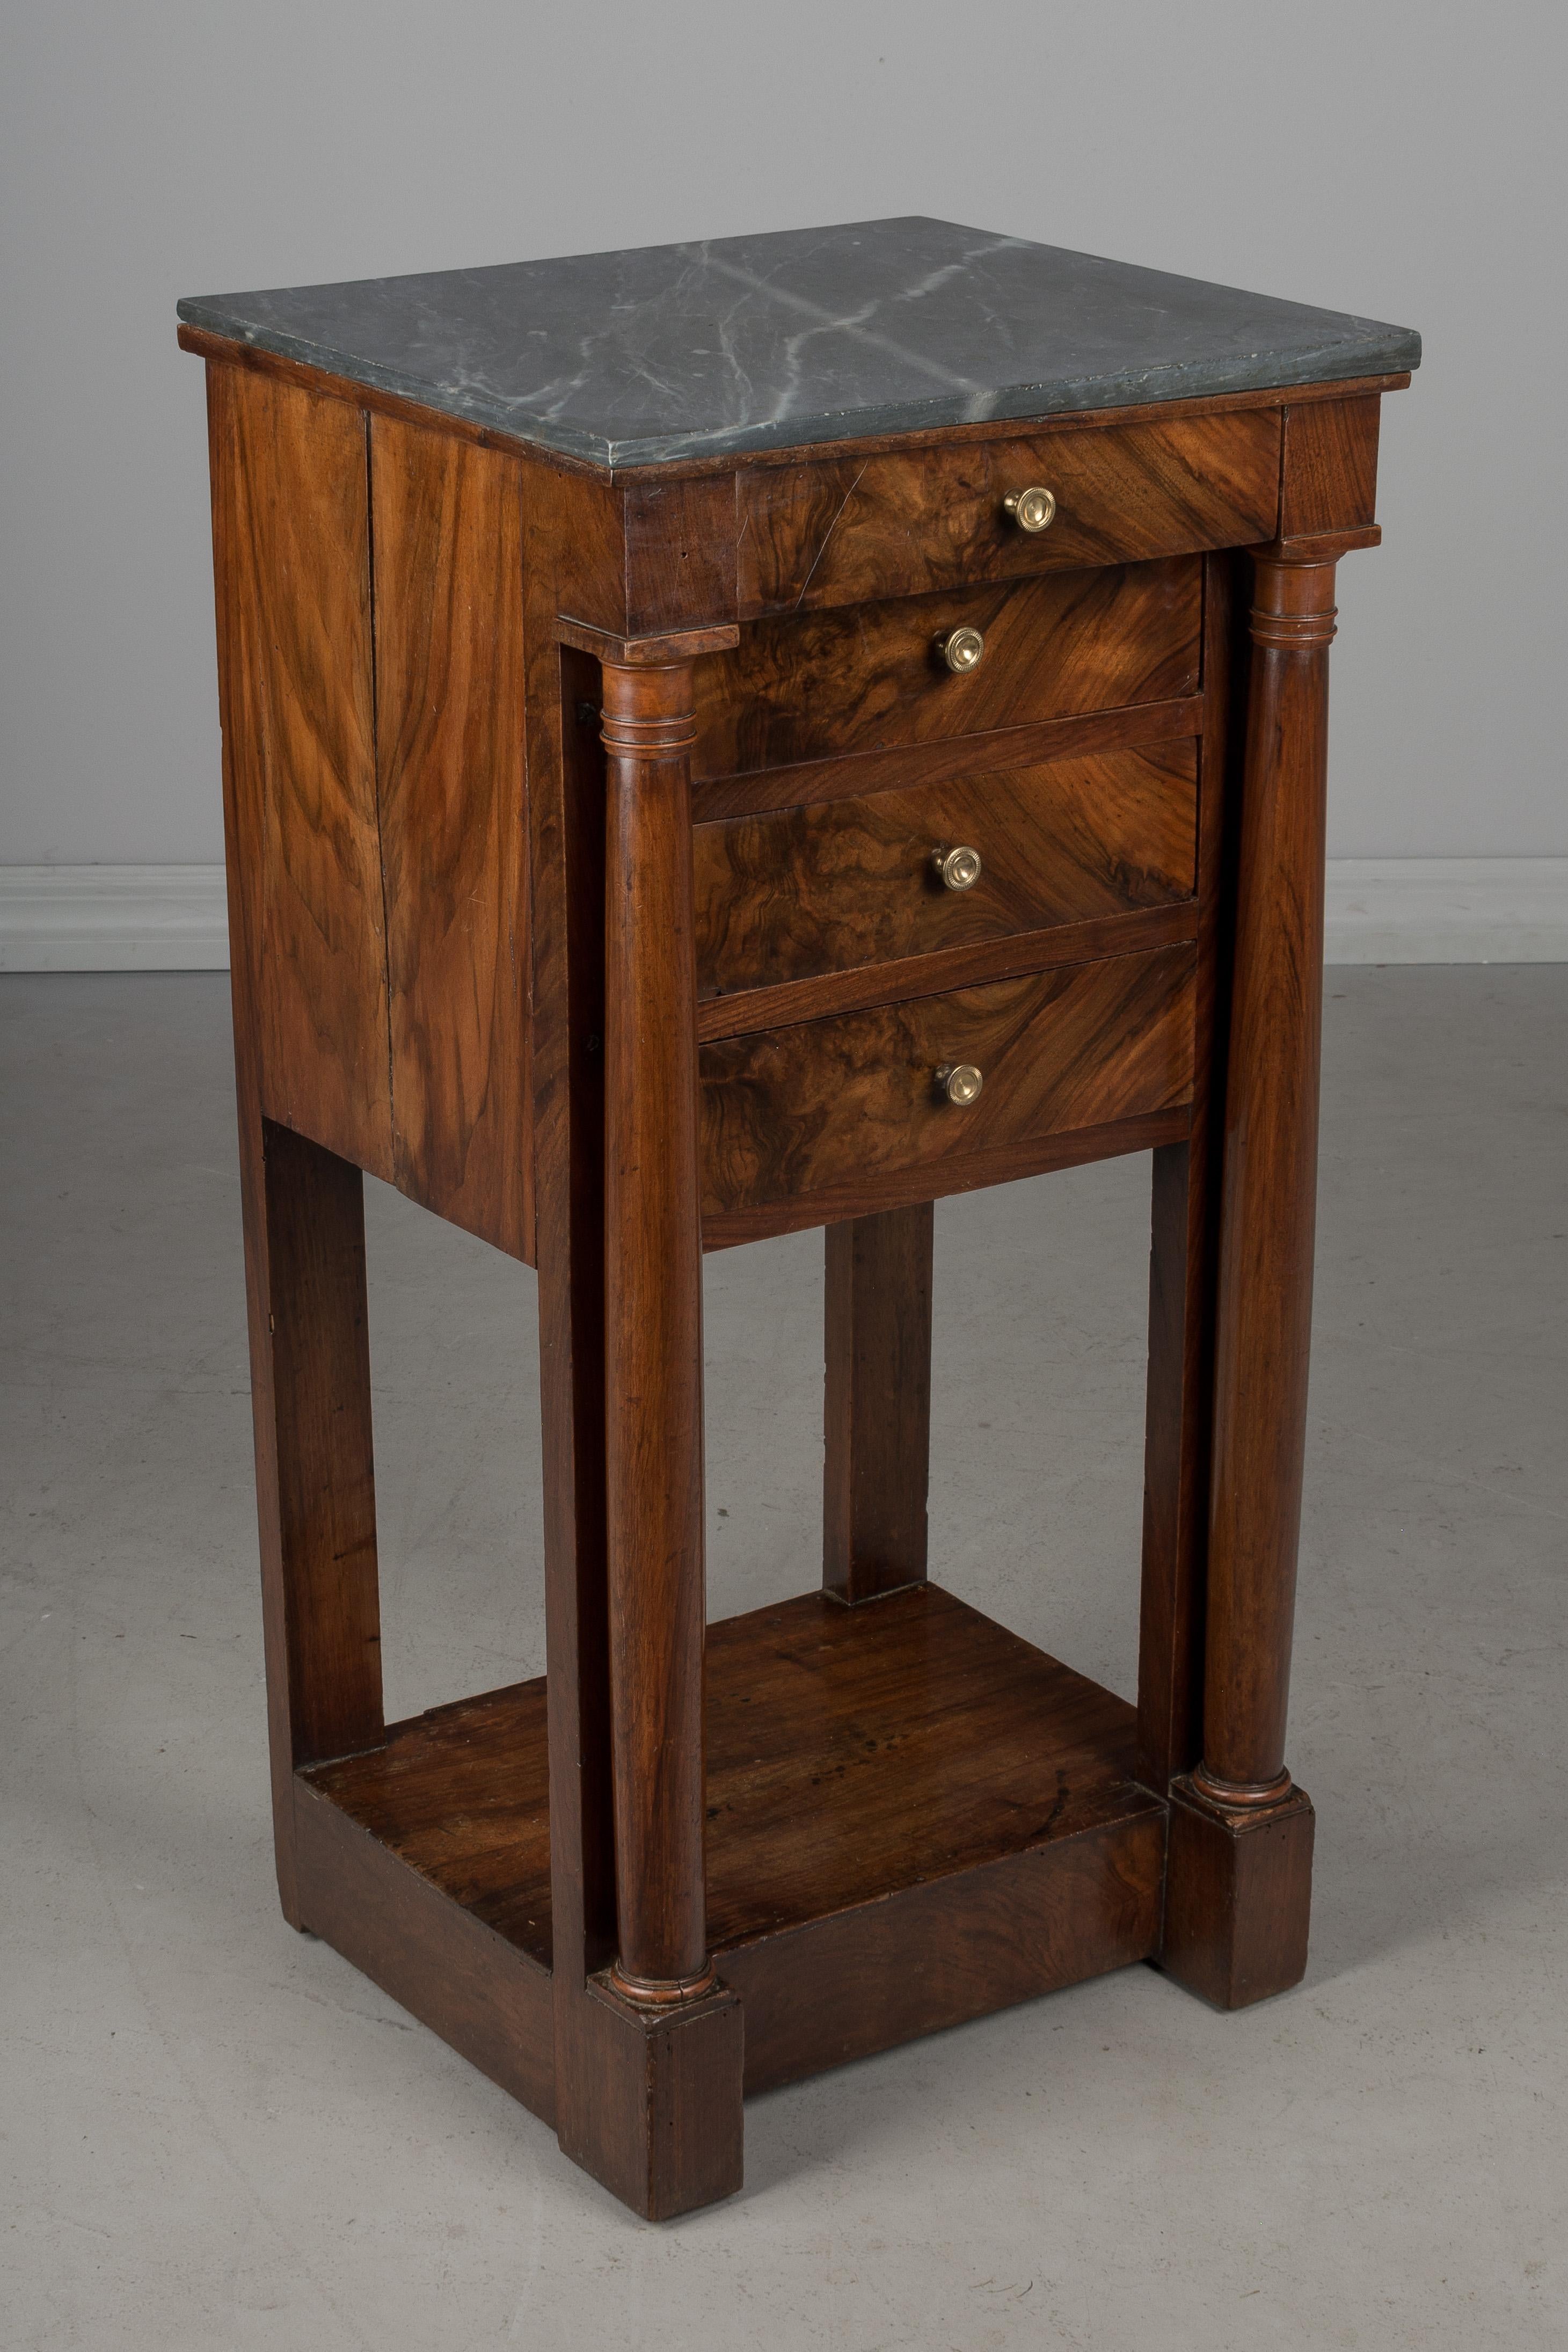 A fine 19th century French Empire marble-top chevet, or side table made of solid walnut with crotch walnut veneer and pine as a secondary wood. Four dovetailed drawers with replaced brass pulls. Turned wood columns in the front. Exceptional